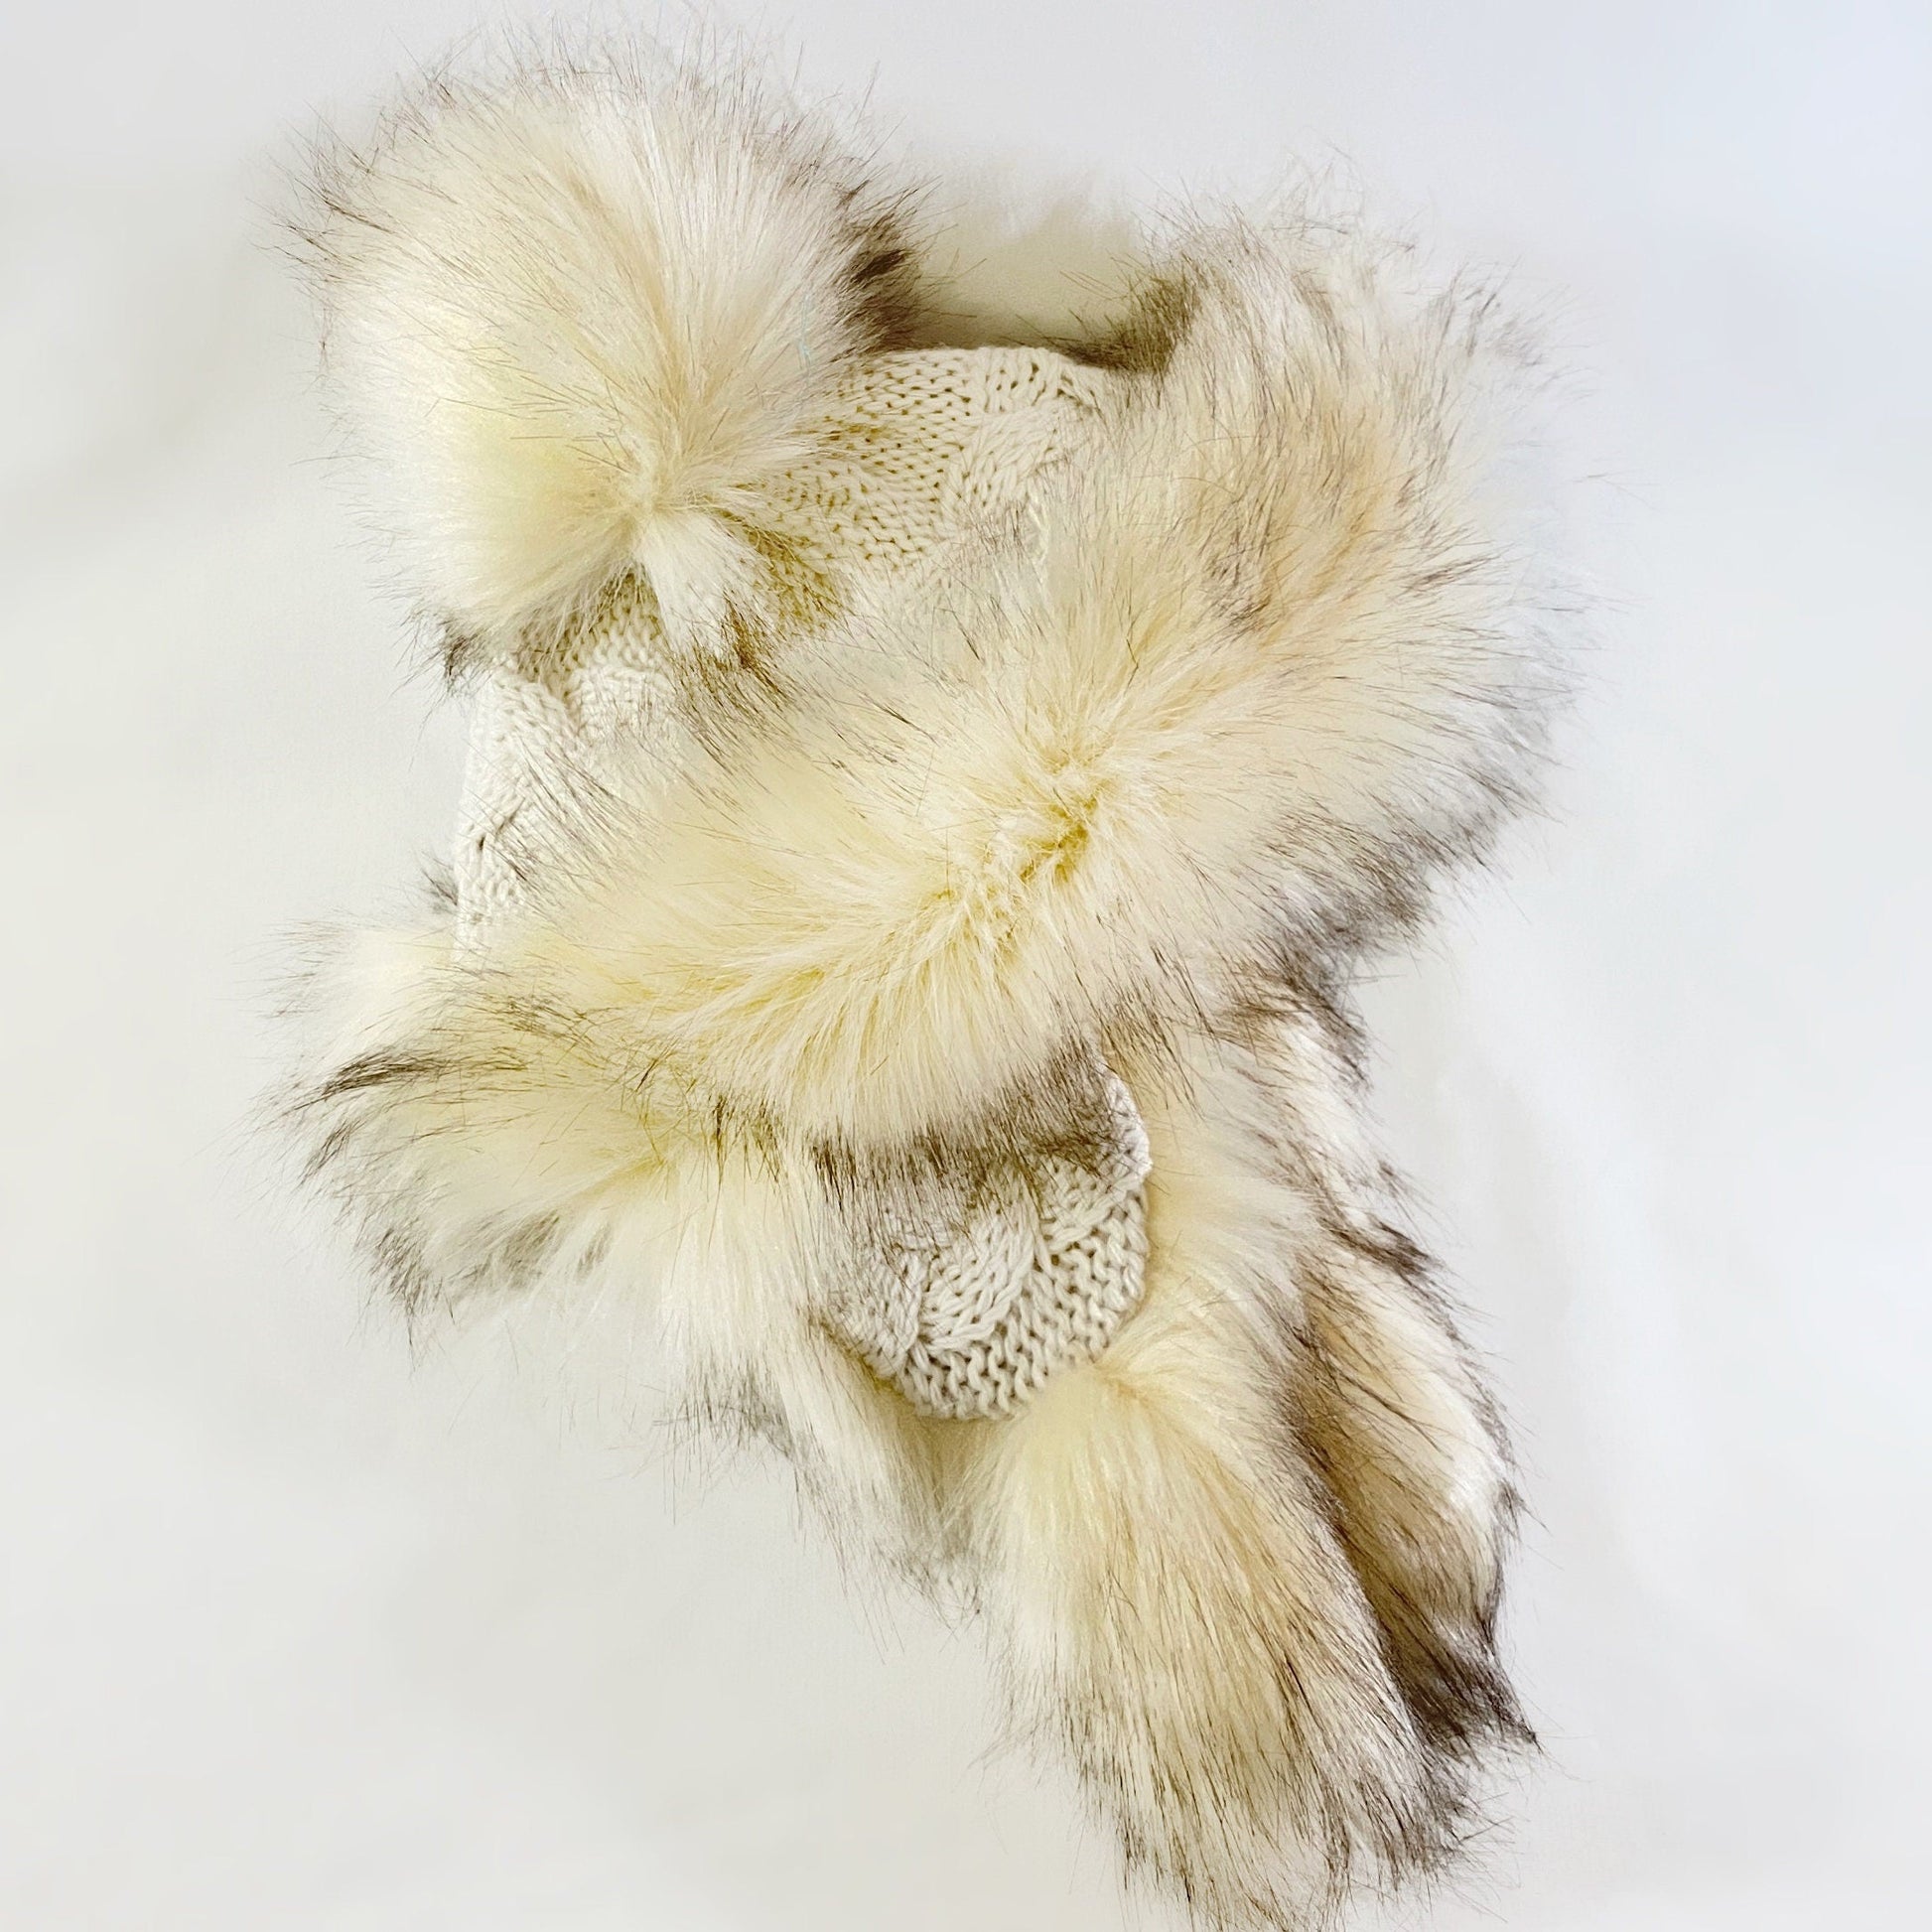 Cream Winter Hat With Flaps and Pom Poms - Made From Italian Wool, Acrylic Yarn, and Faux Fur